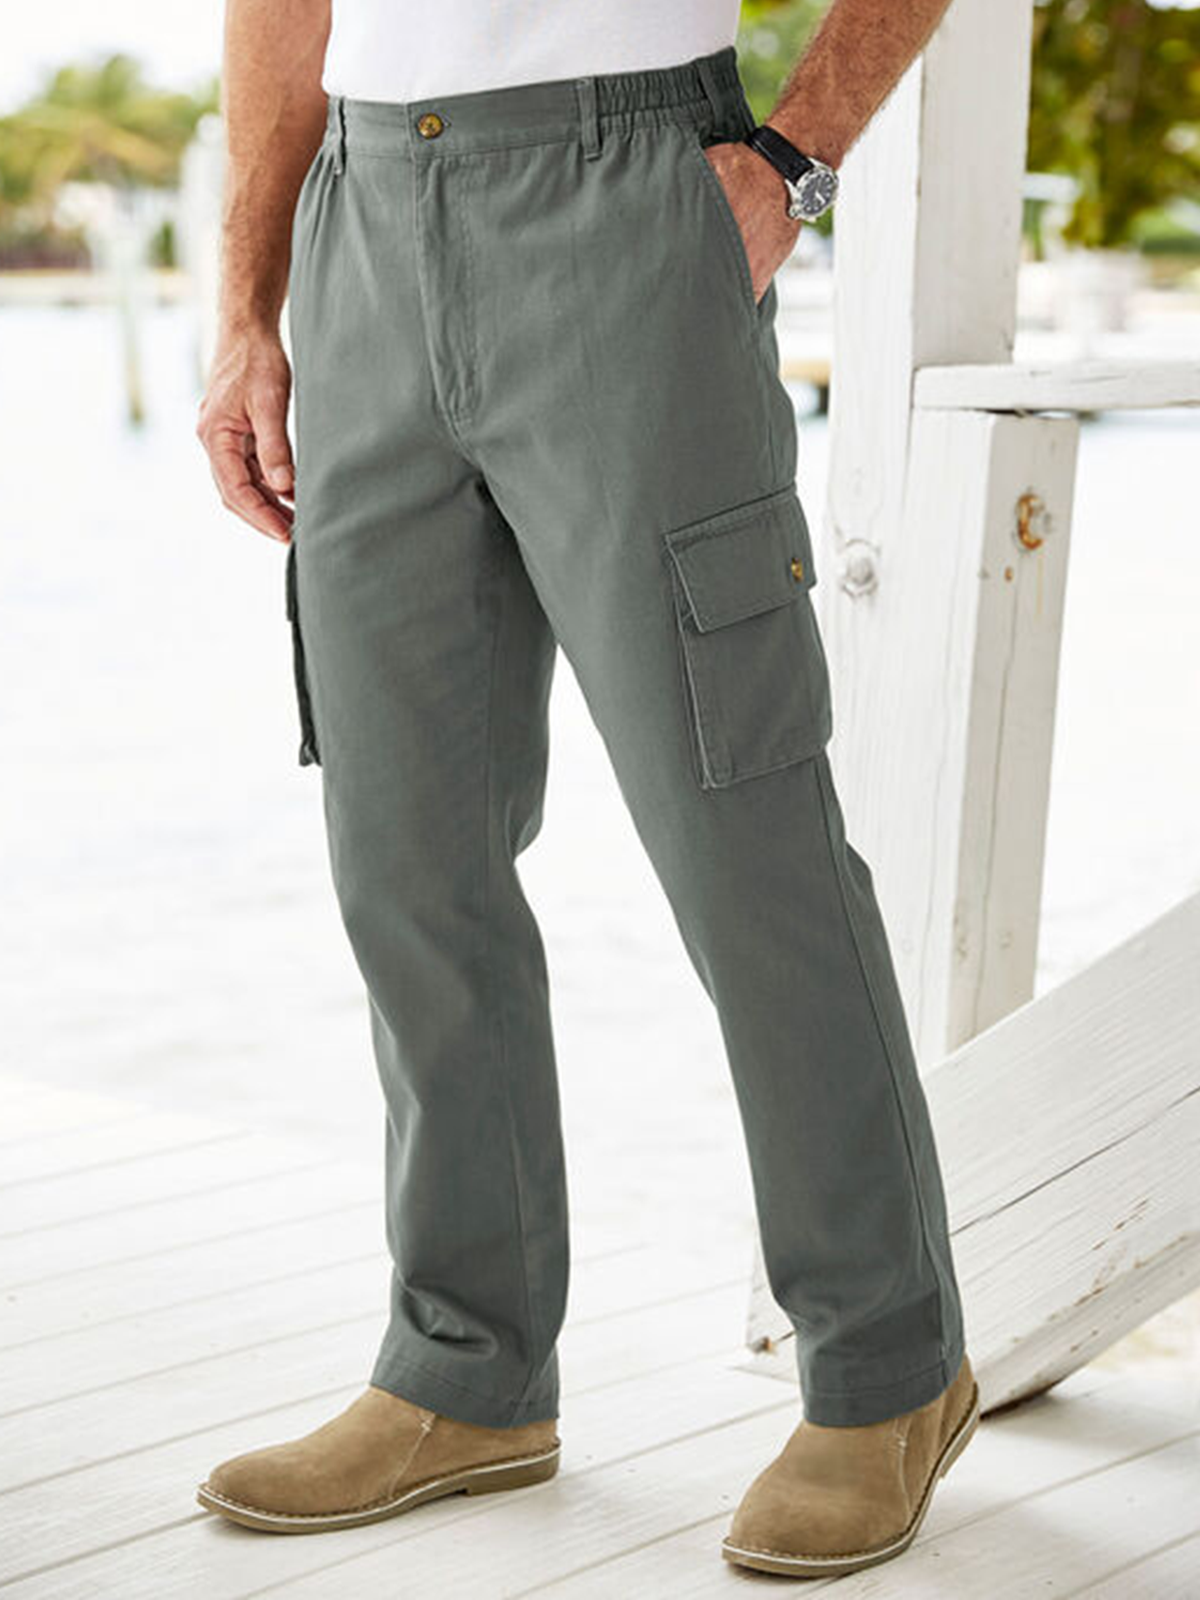 Cotton and linen style american-style based comfortable leisure trousers